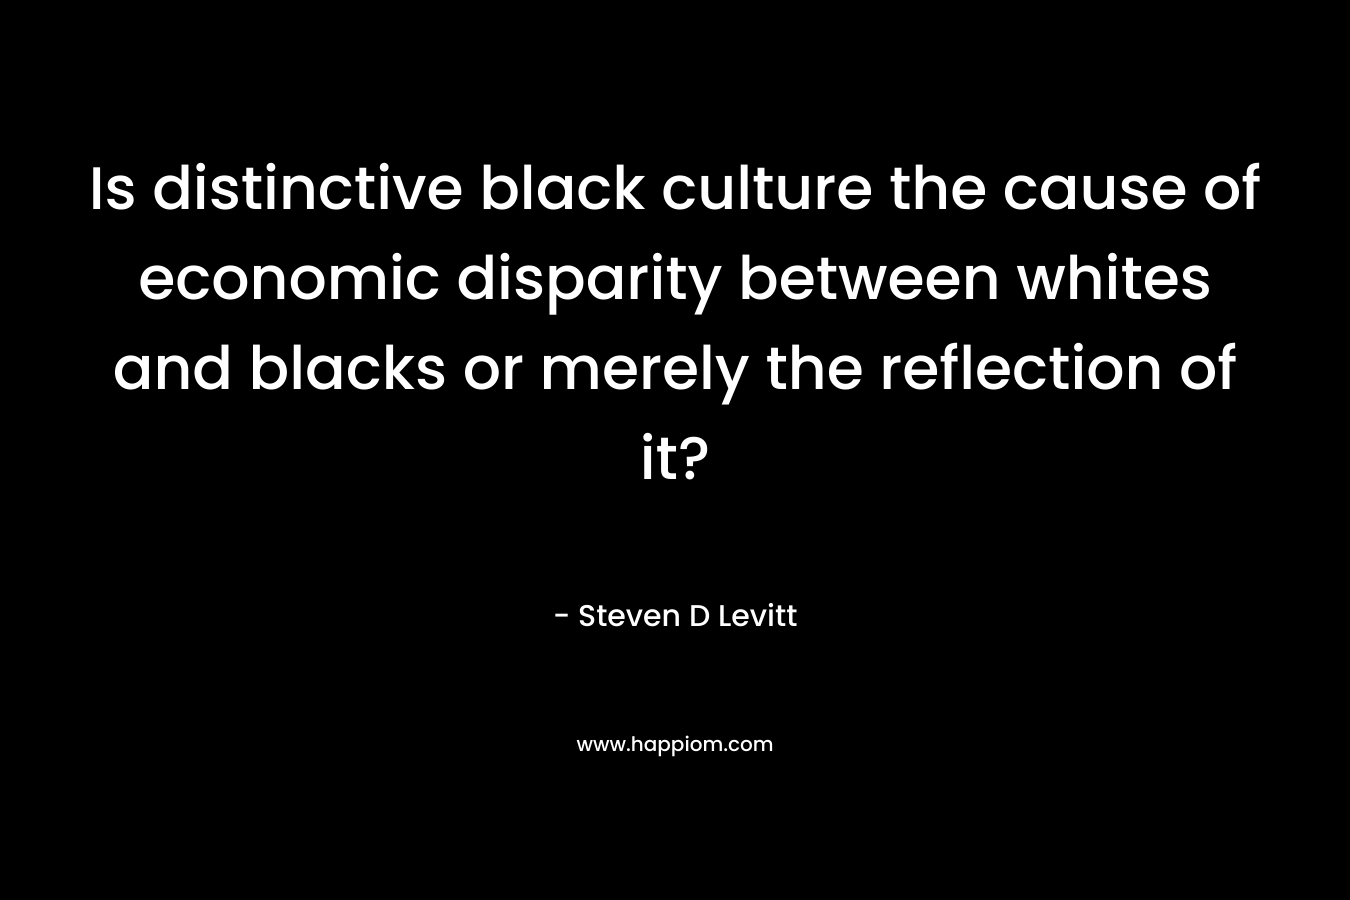 Is distinctive black culture the cause of economic disparity between whites and blacks or merely the reflection of it?